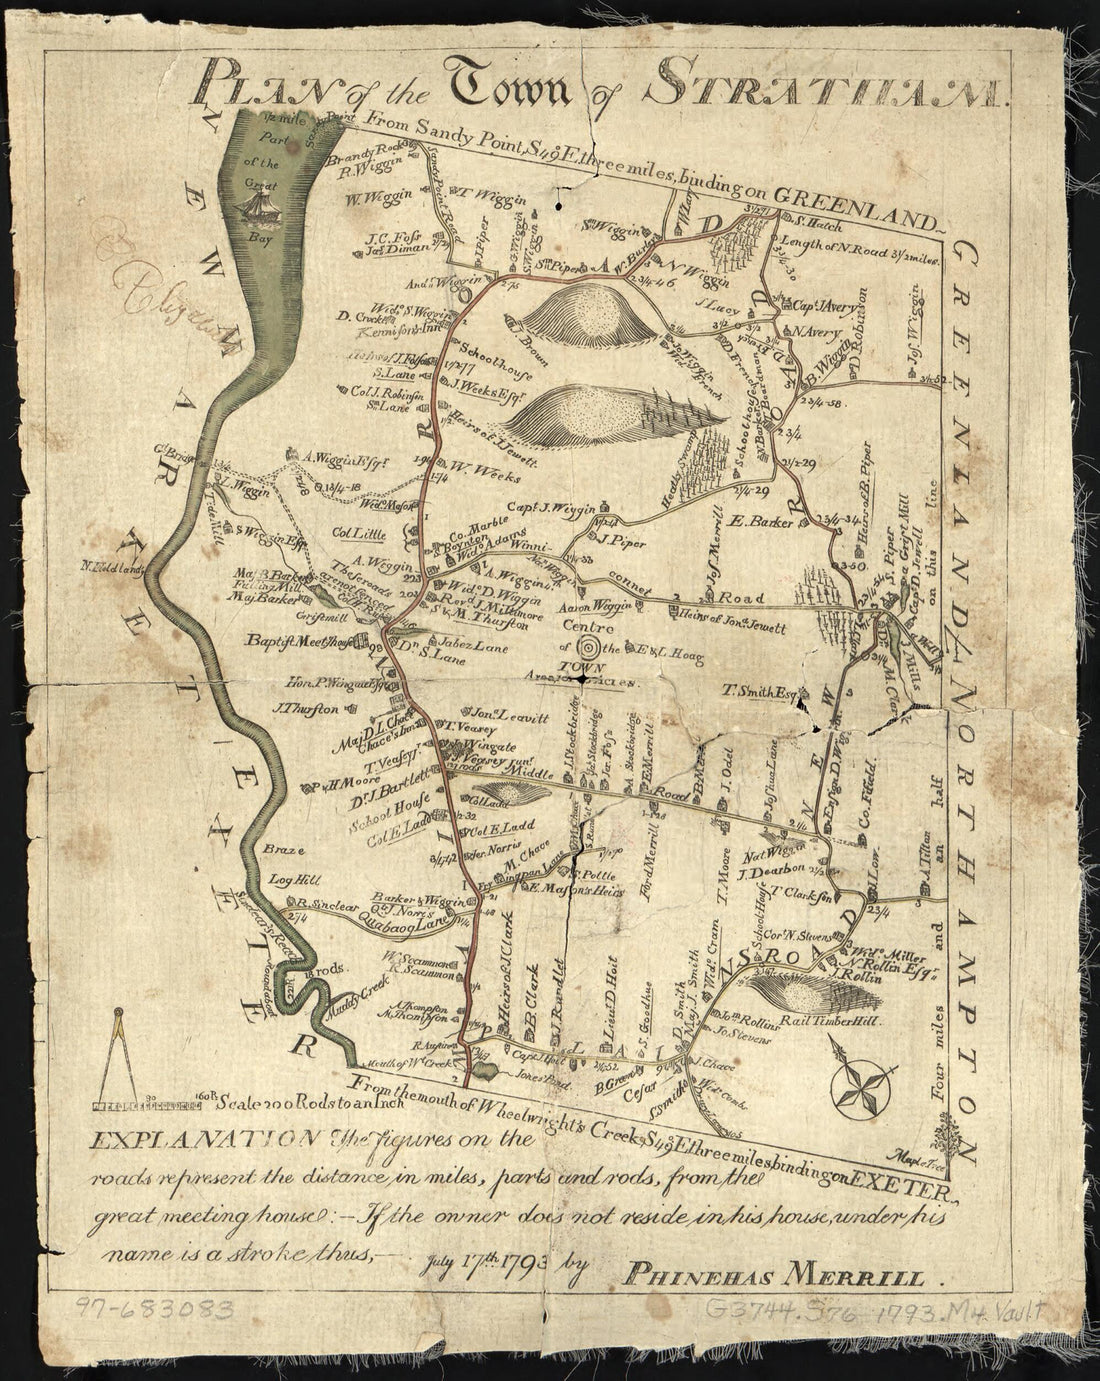 This old map of Plan of the Town of Stratham from 1793 was created by Phinehas Merrill in 1793